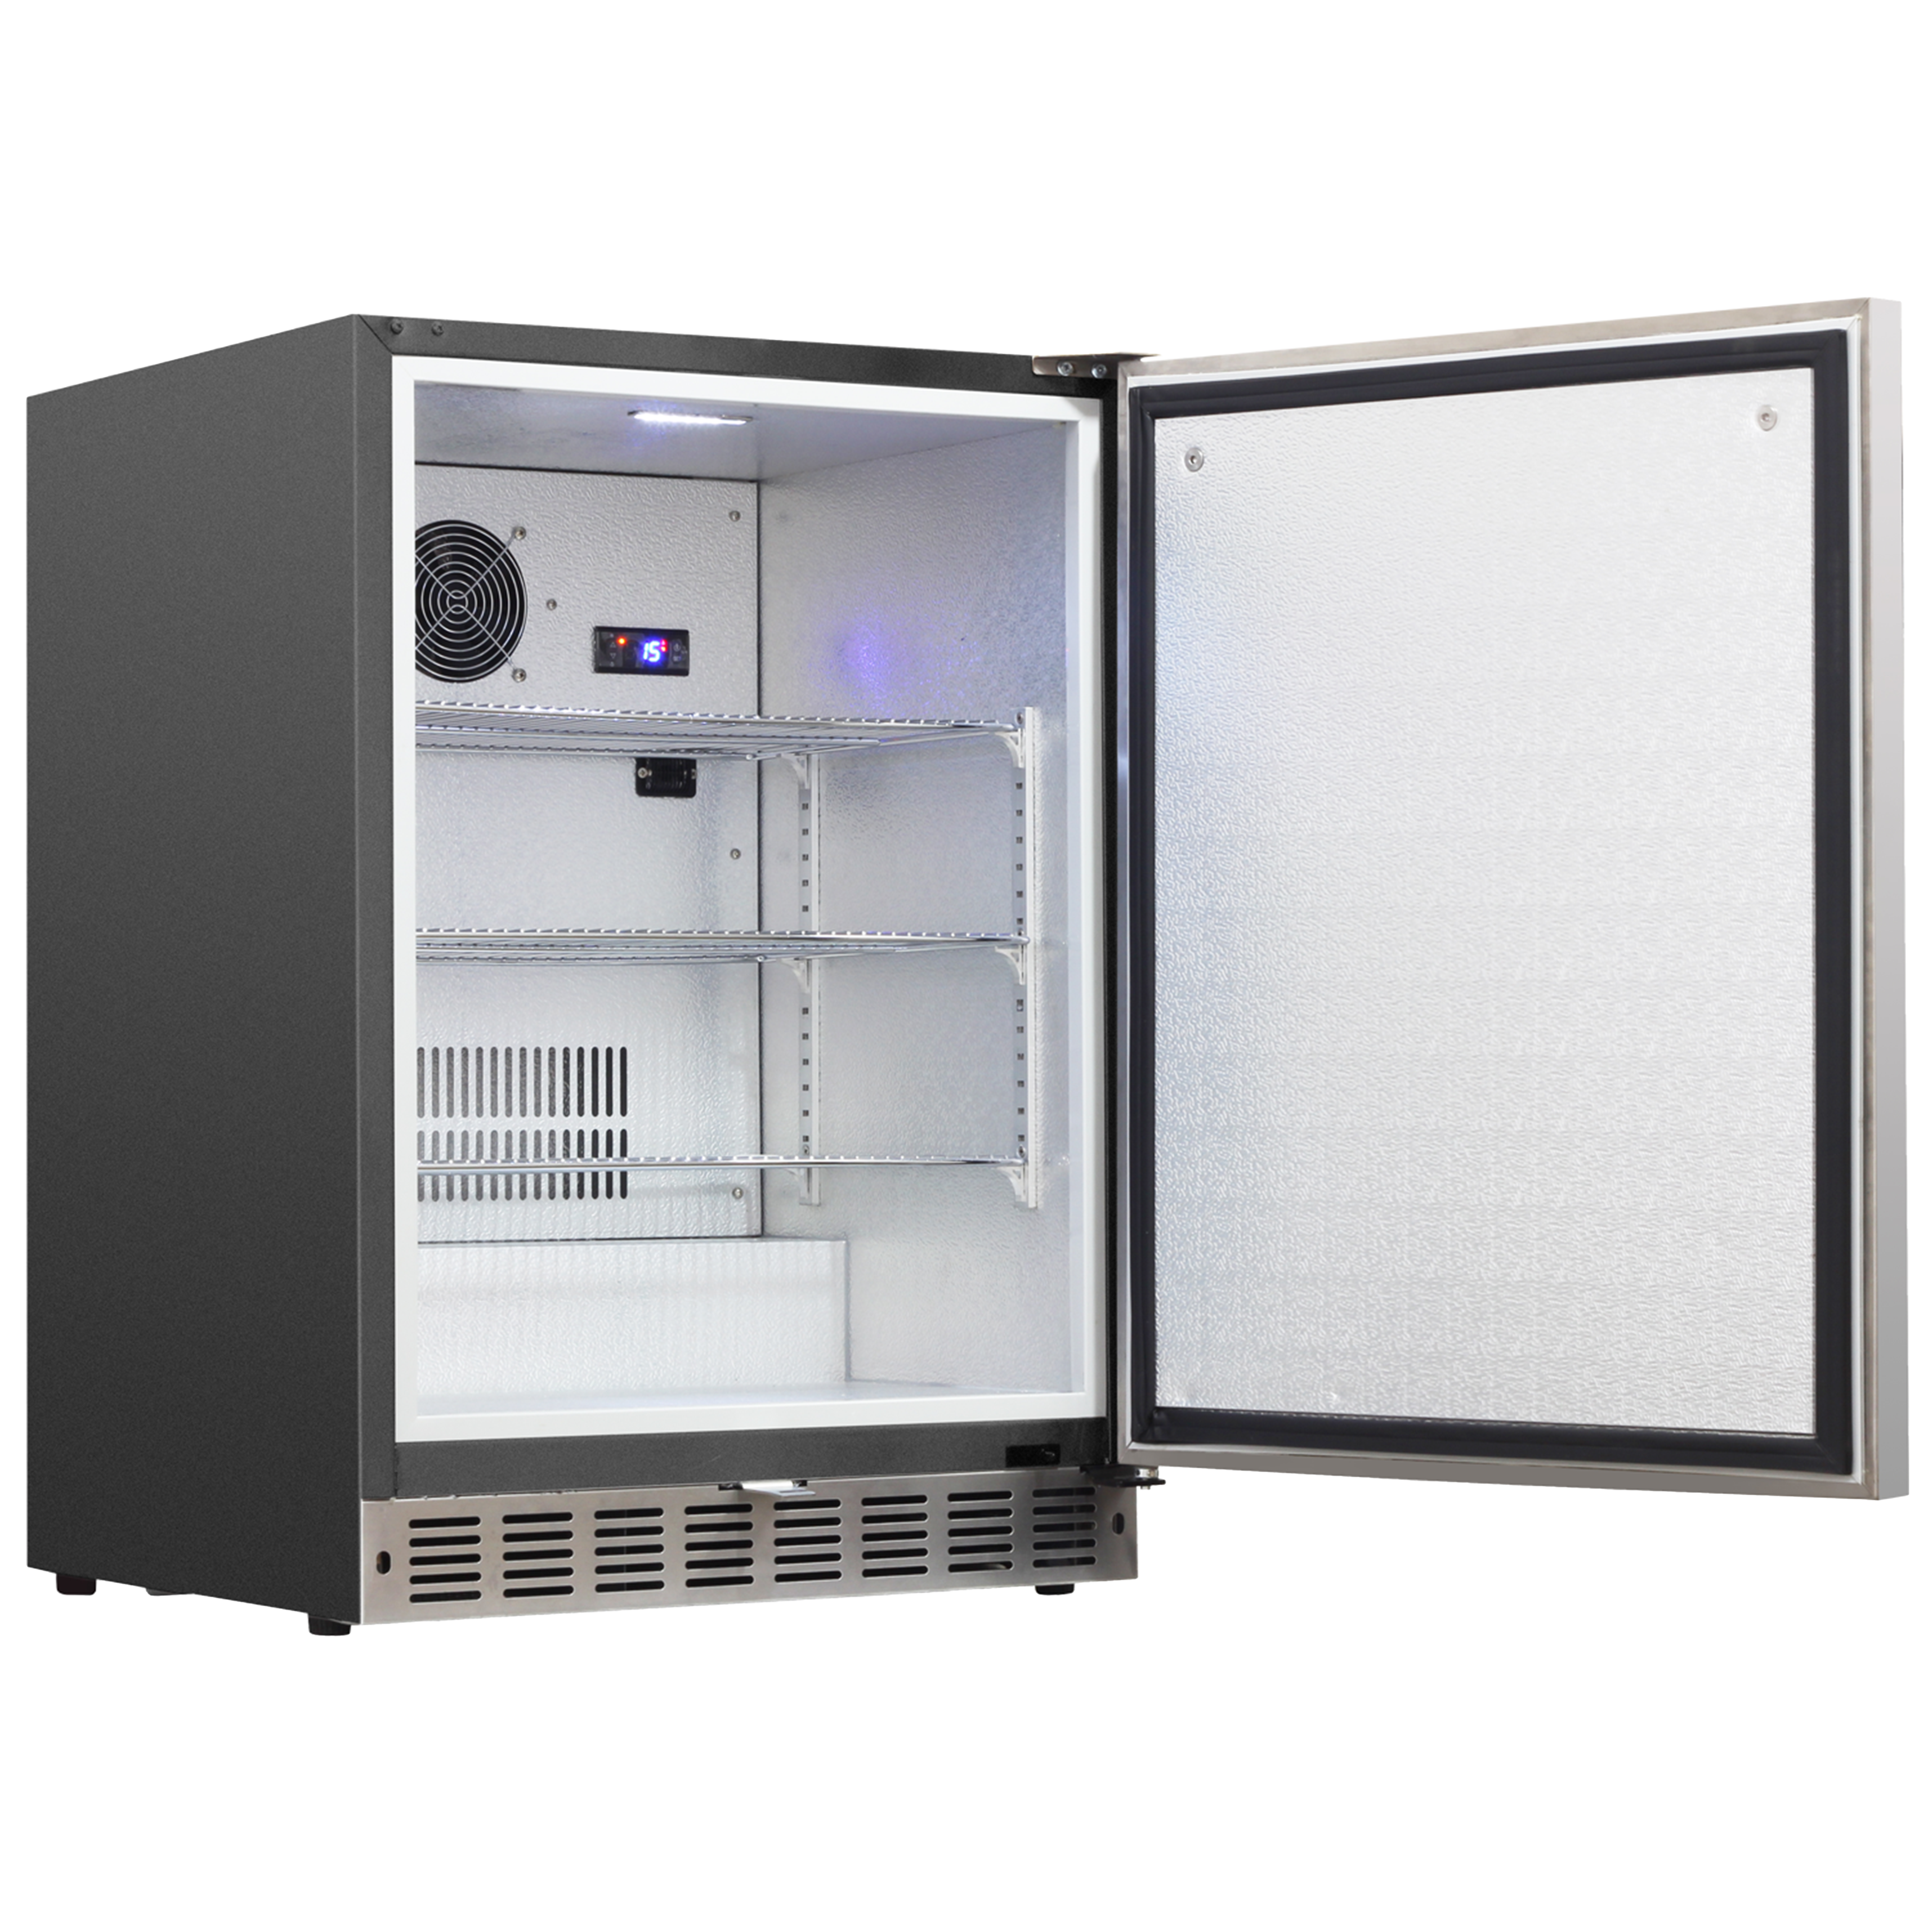 Side view of a 5.12 Cu Ft Undercounter Beverage Outdoor Refrigerator 161 Cans with the door open, revealing interior space with three shelves and a digital thermostat